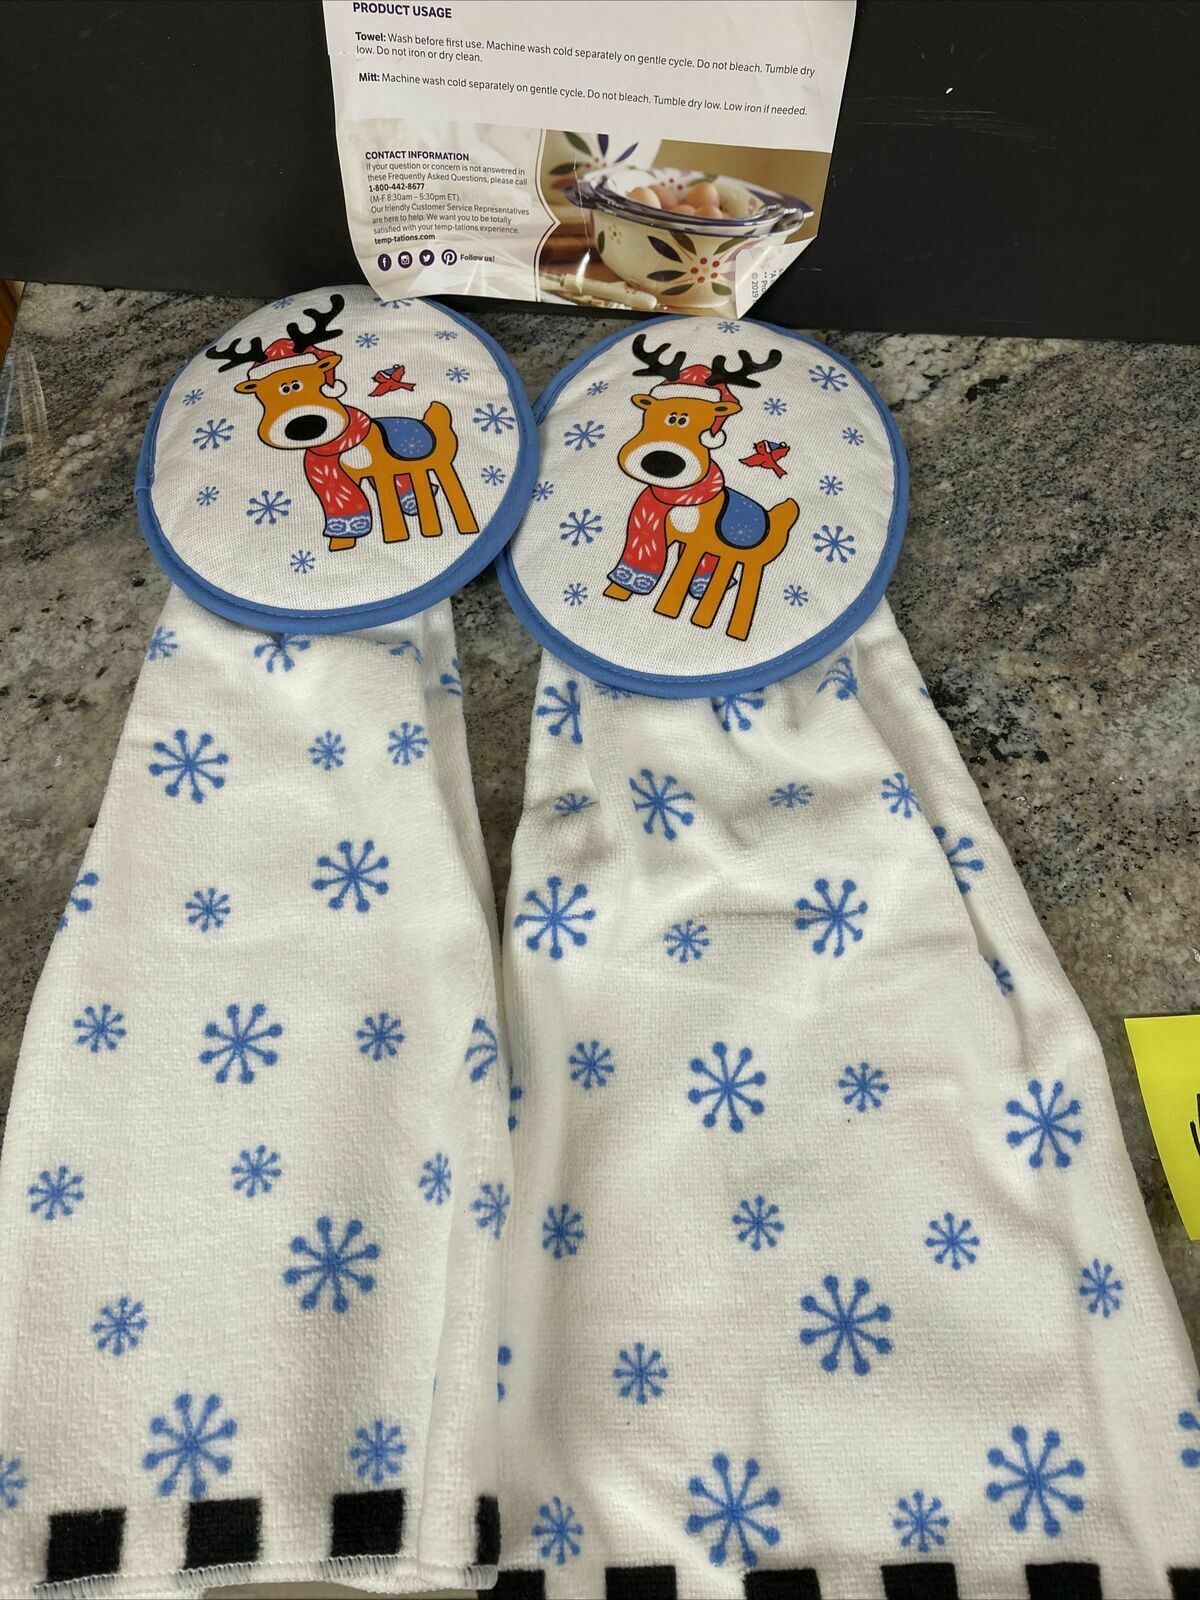 Temp-tations Set of 2 Christmas reindeer Kitchen Towel and Mitt Set. NEW IN BOX